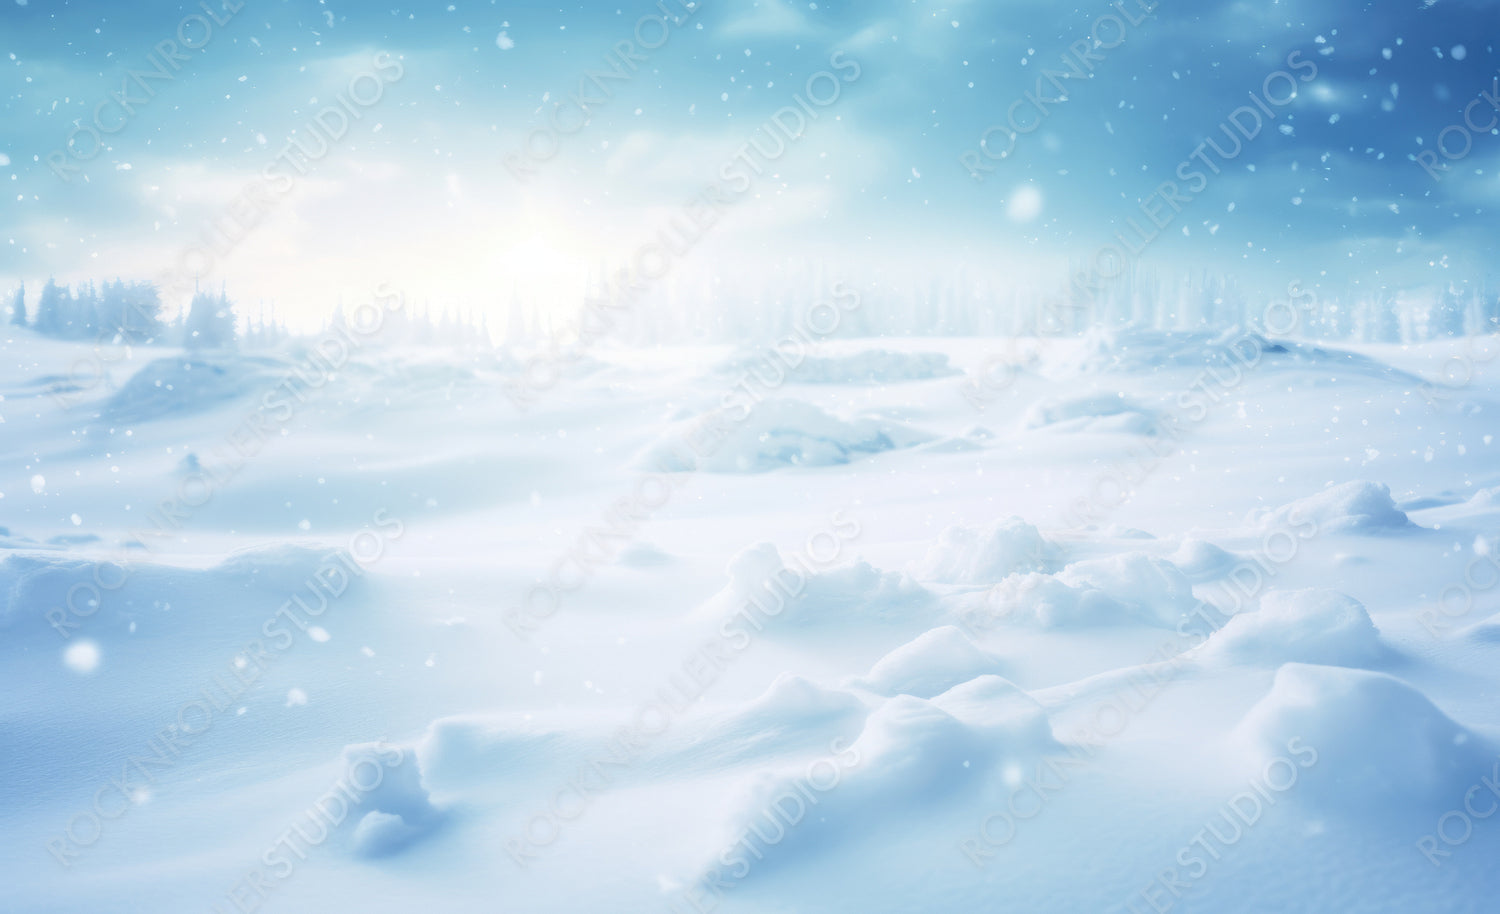 Beautiful background image of small snowdrifts, falling snow and snowflakes in white and blue tones.